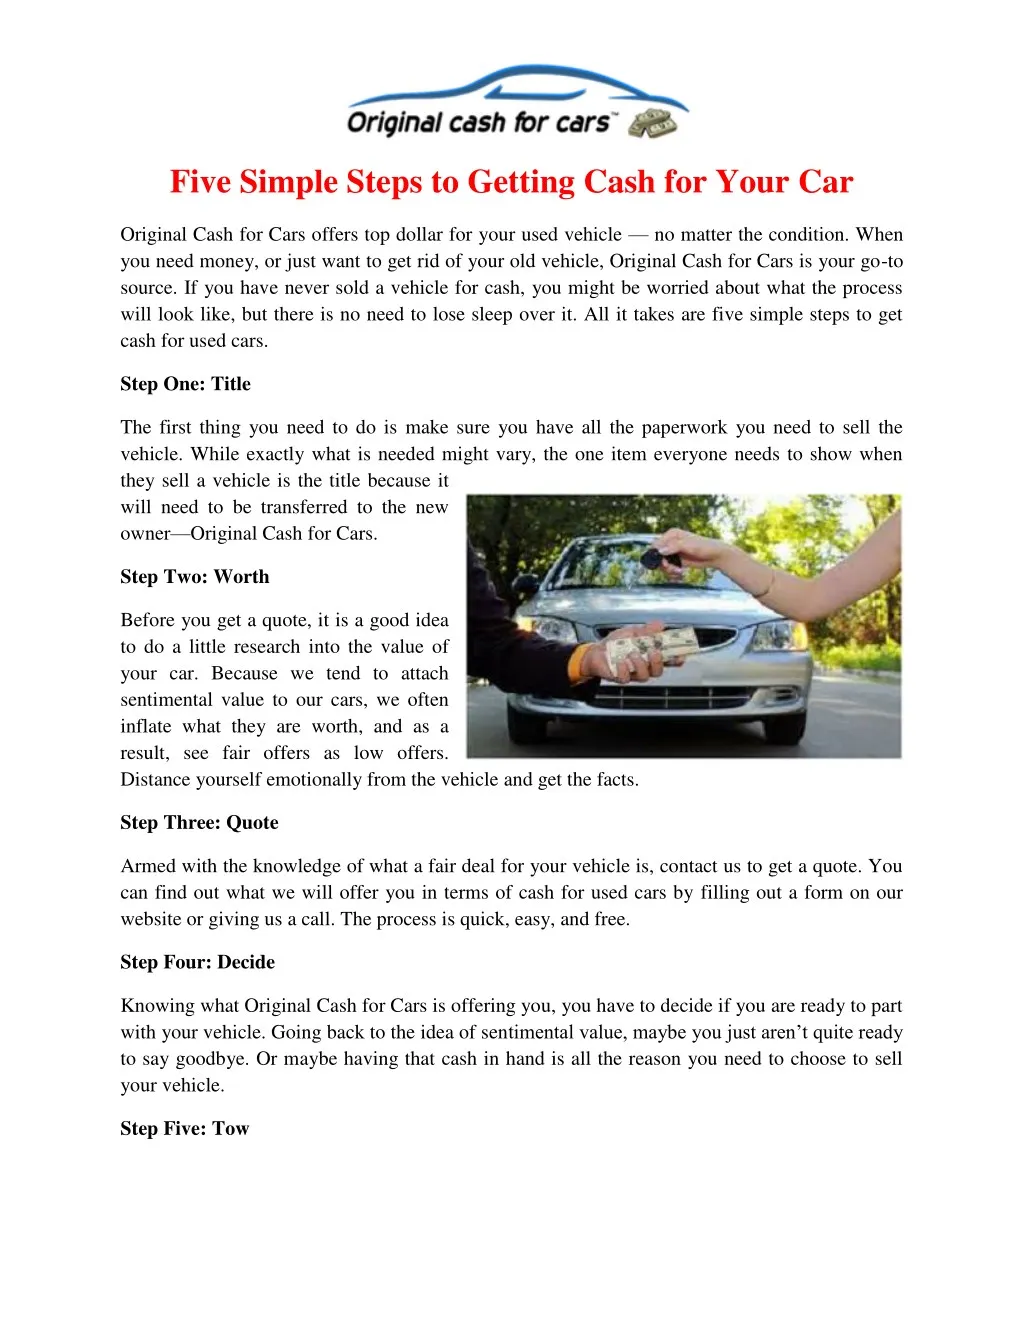 five simple steps to getting cash for your car